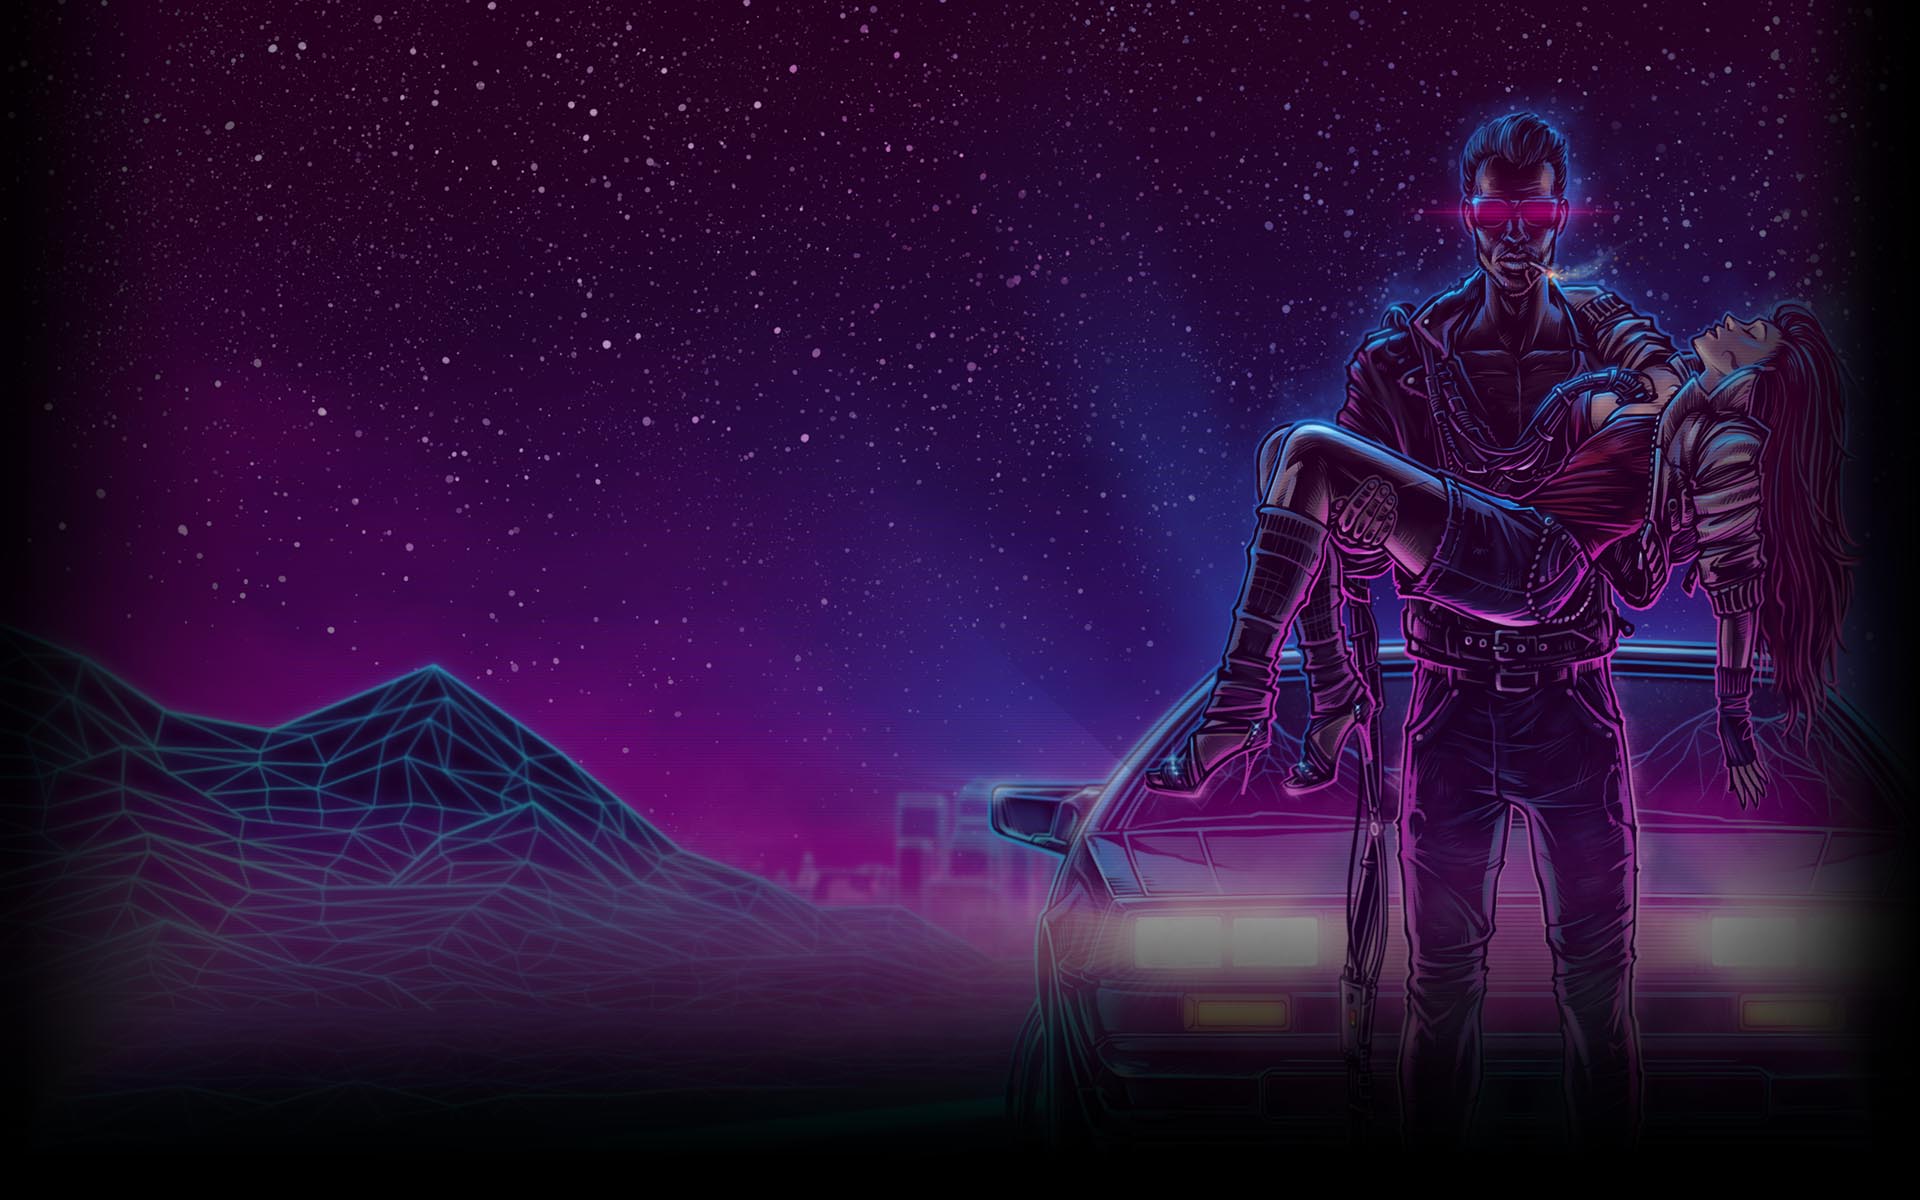 just got my synthwave playlist going when checking the workshop :) will you...